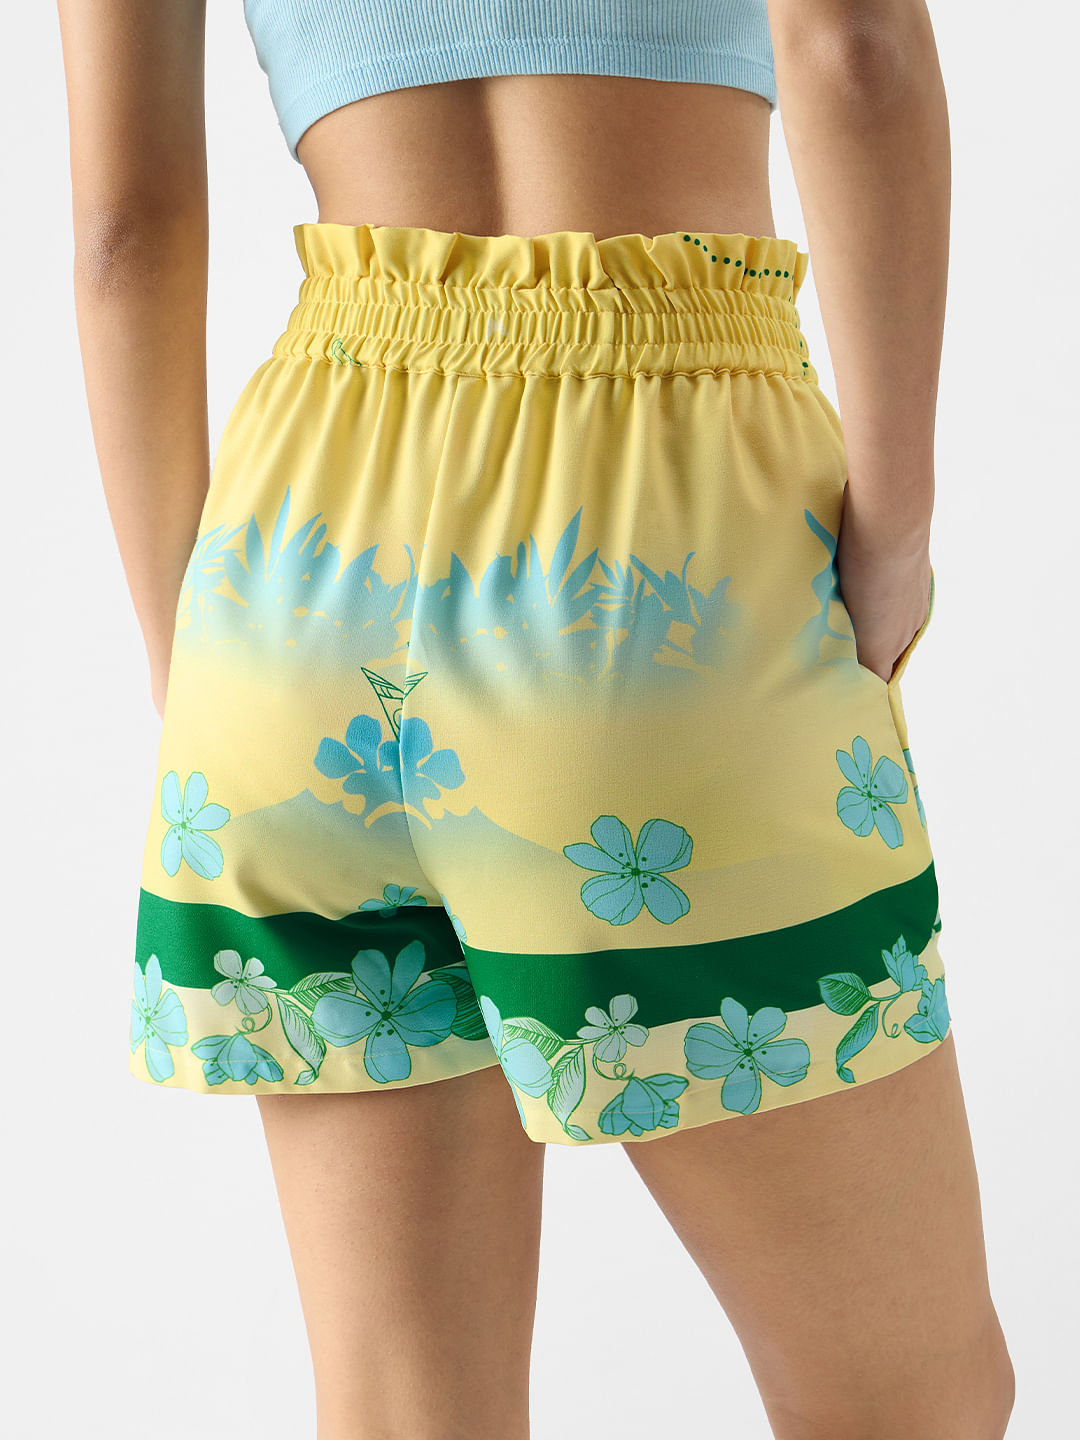 Buy Tinker Bell: Touch of Magic Women Shorts Online